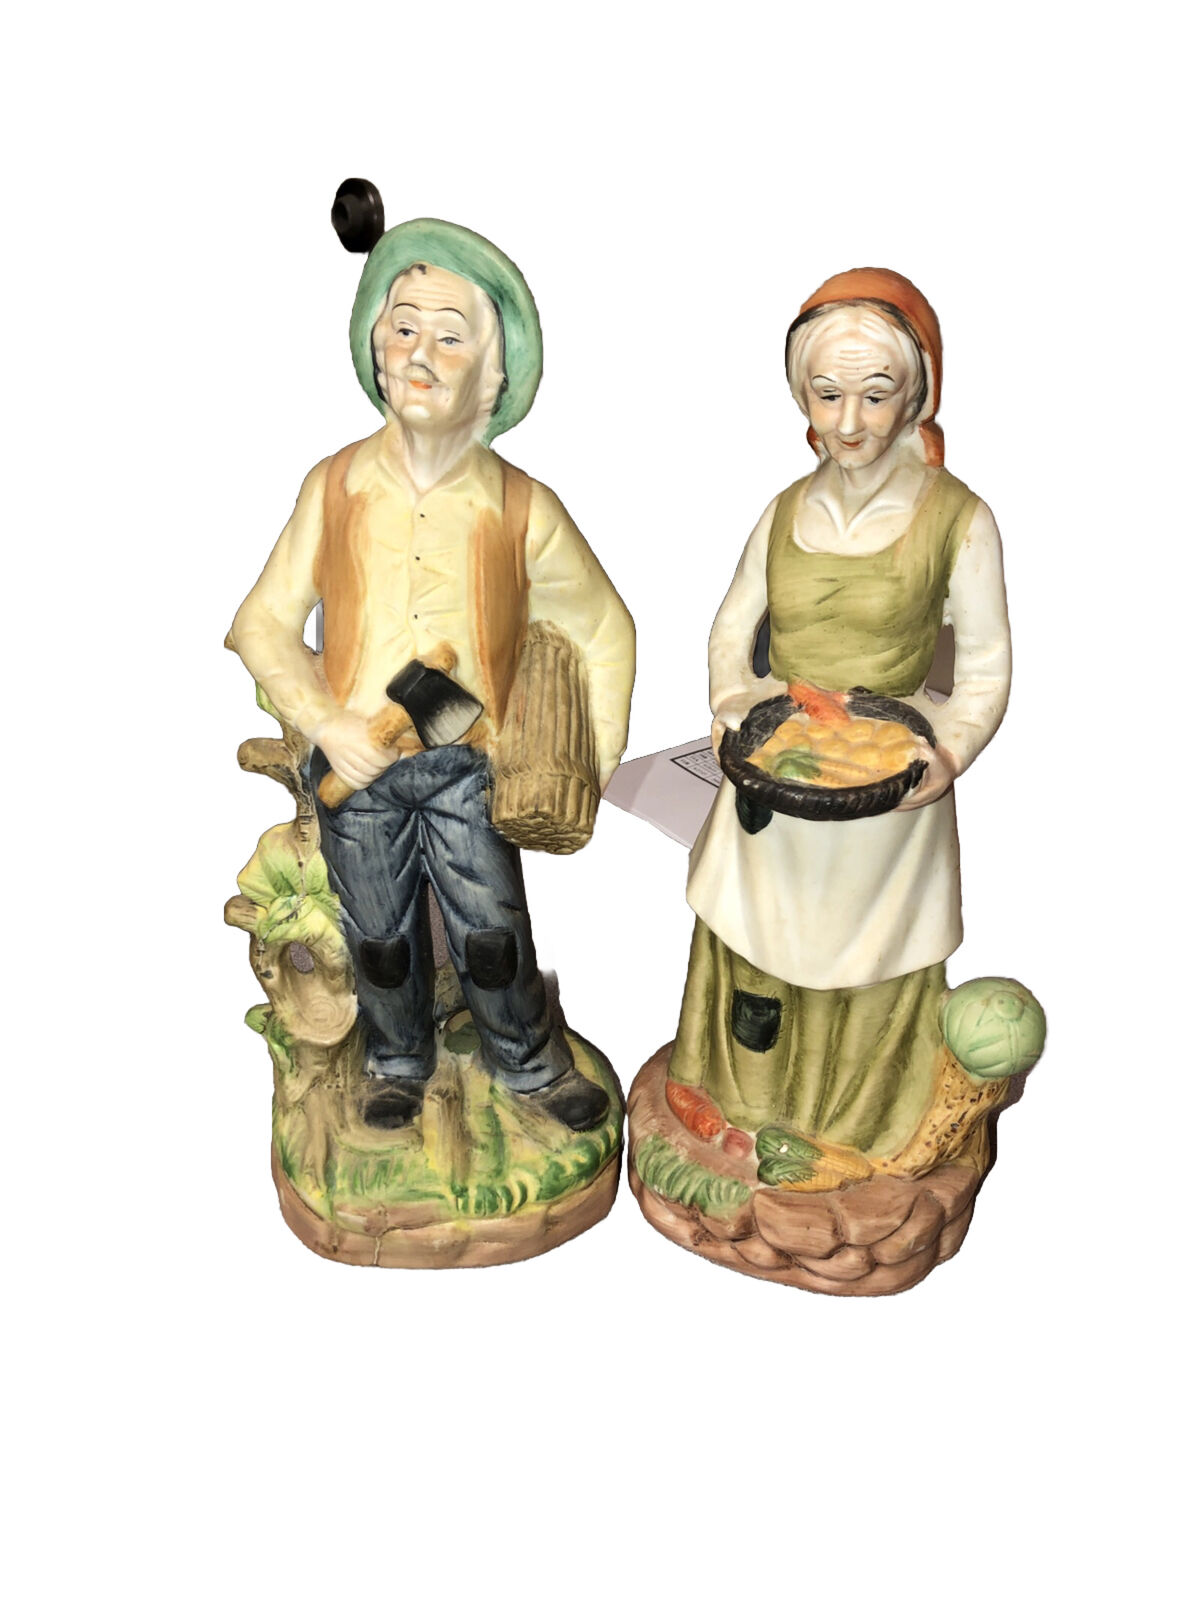 Vintage Homco Old Man and Women Figures